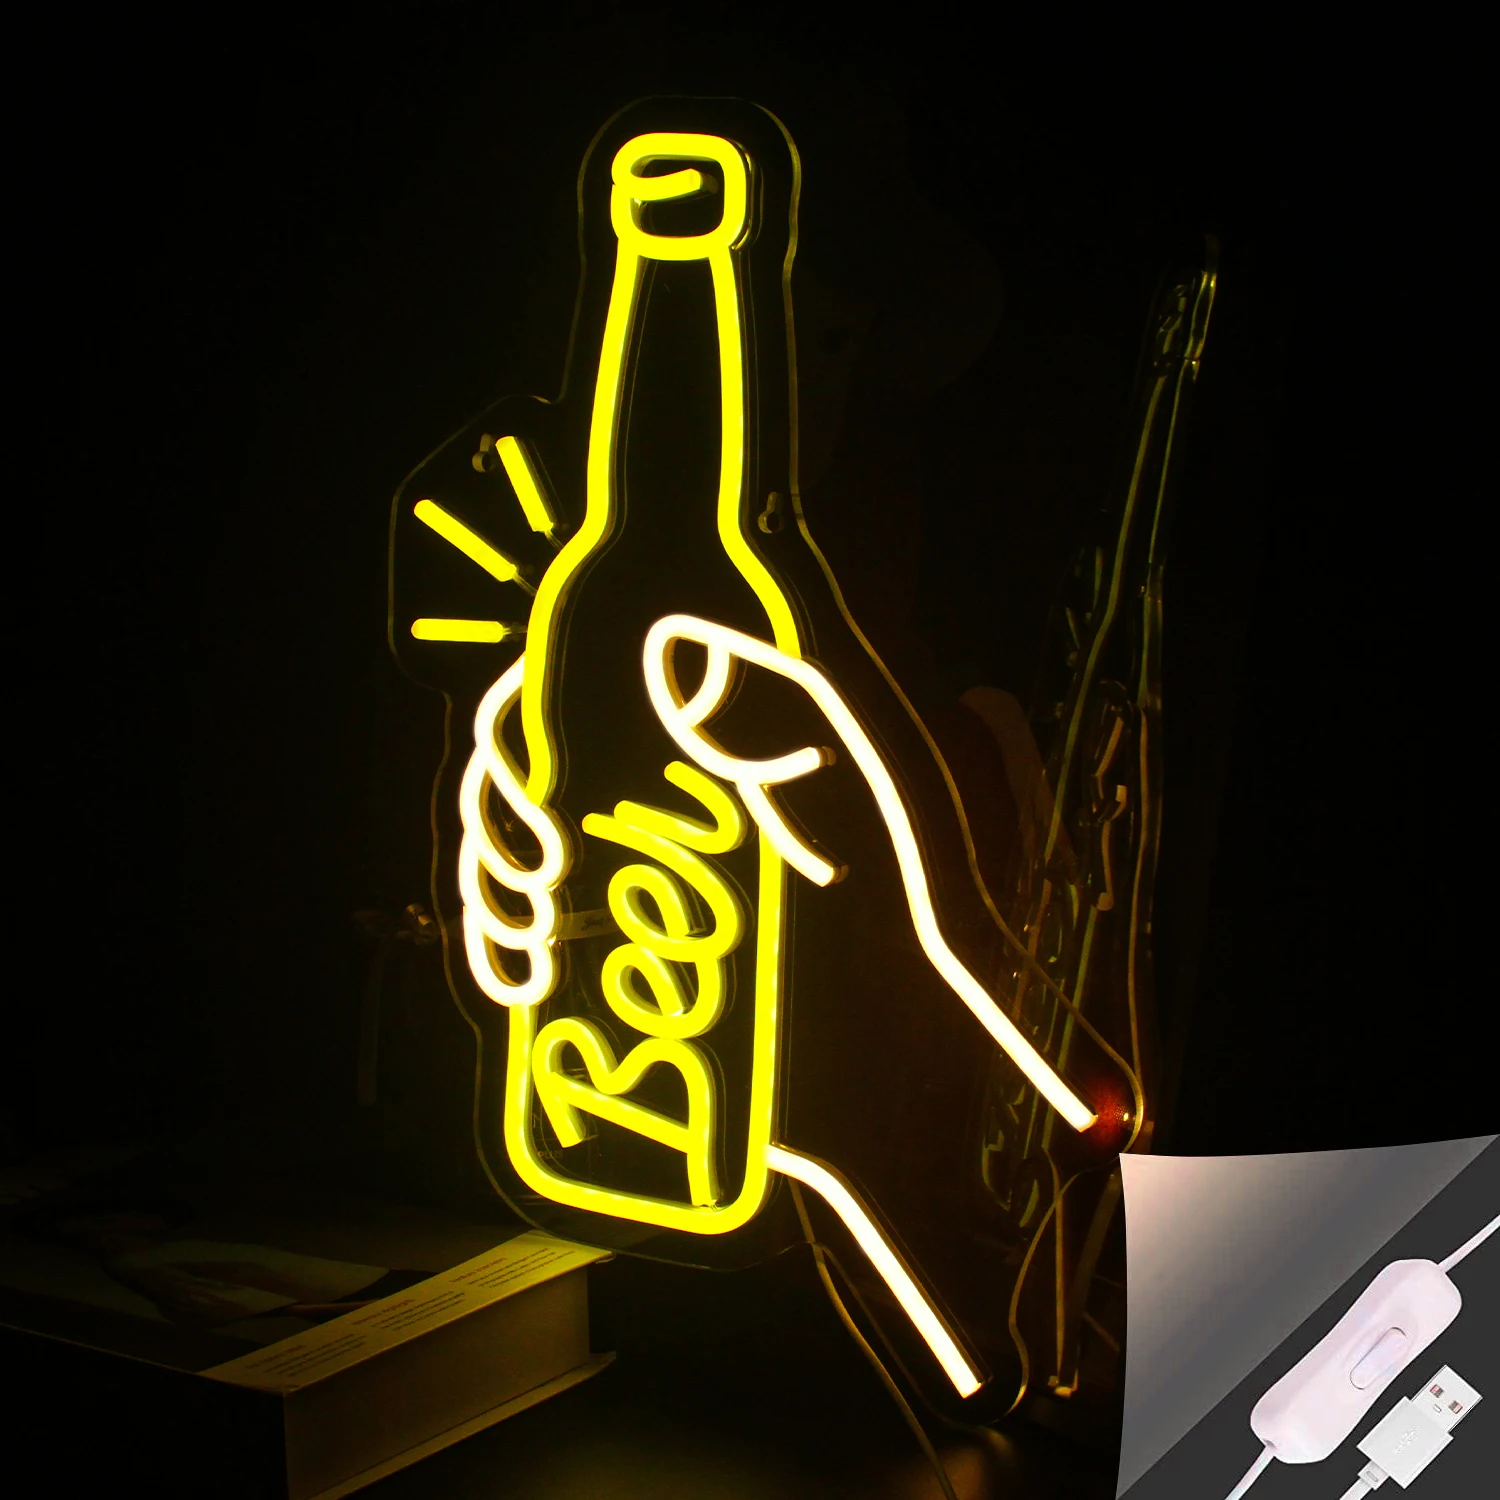 

Neon Sign For LED BAR Clink Beer Party Club Room Hanging Lighting USB Powered Cheers Atmosphere Wall Decor